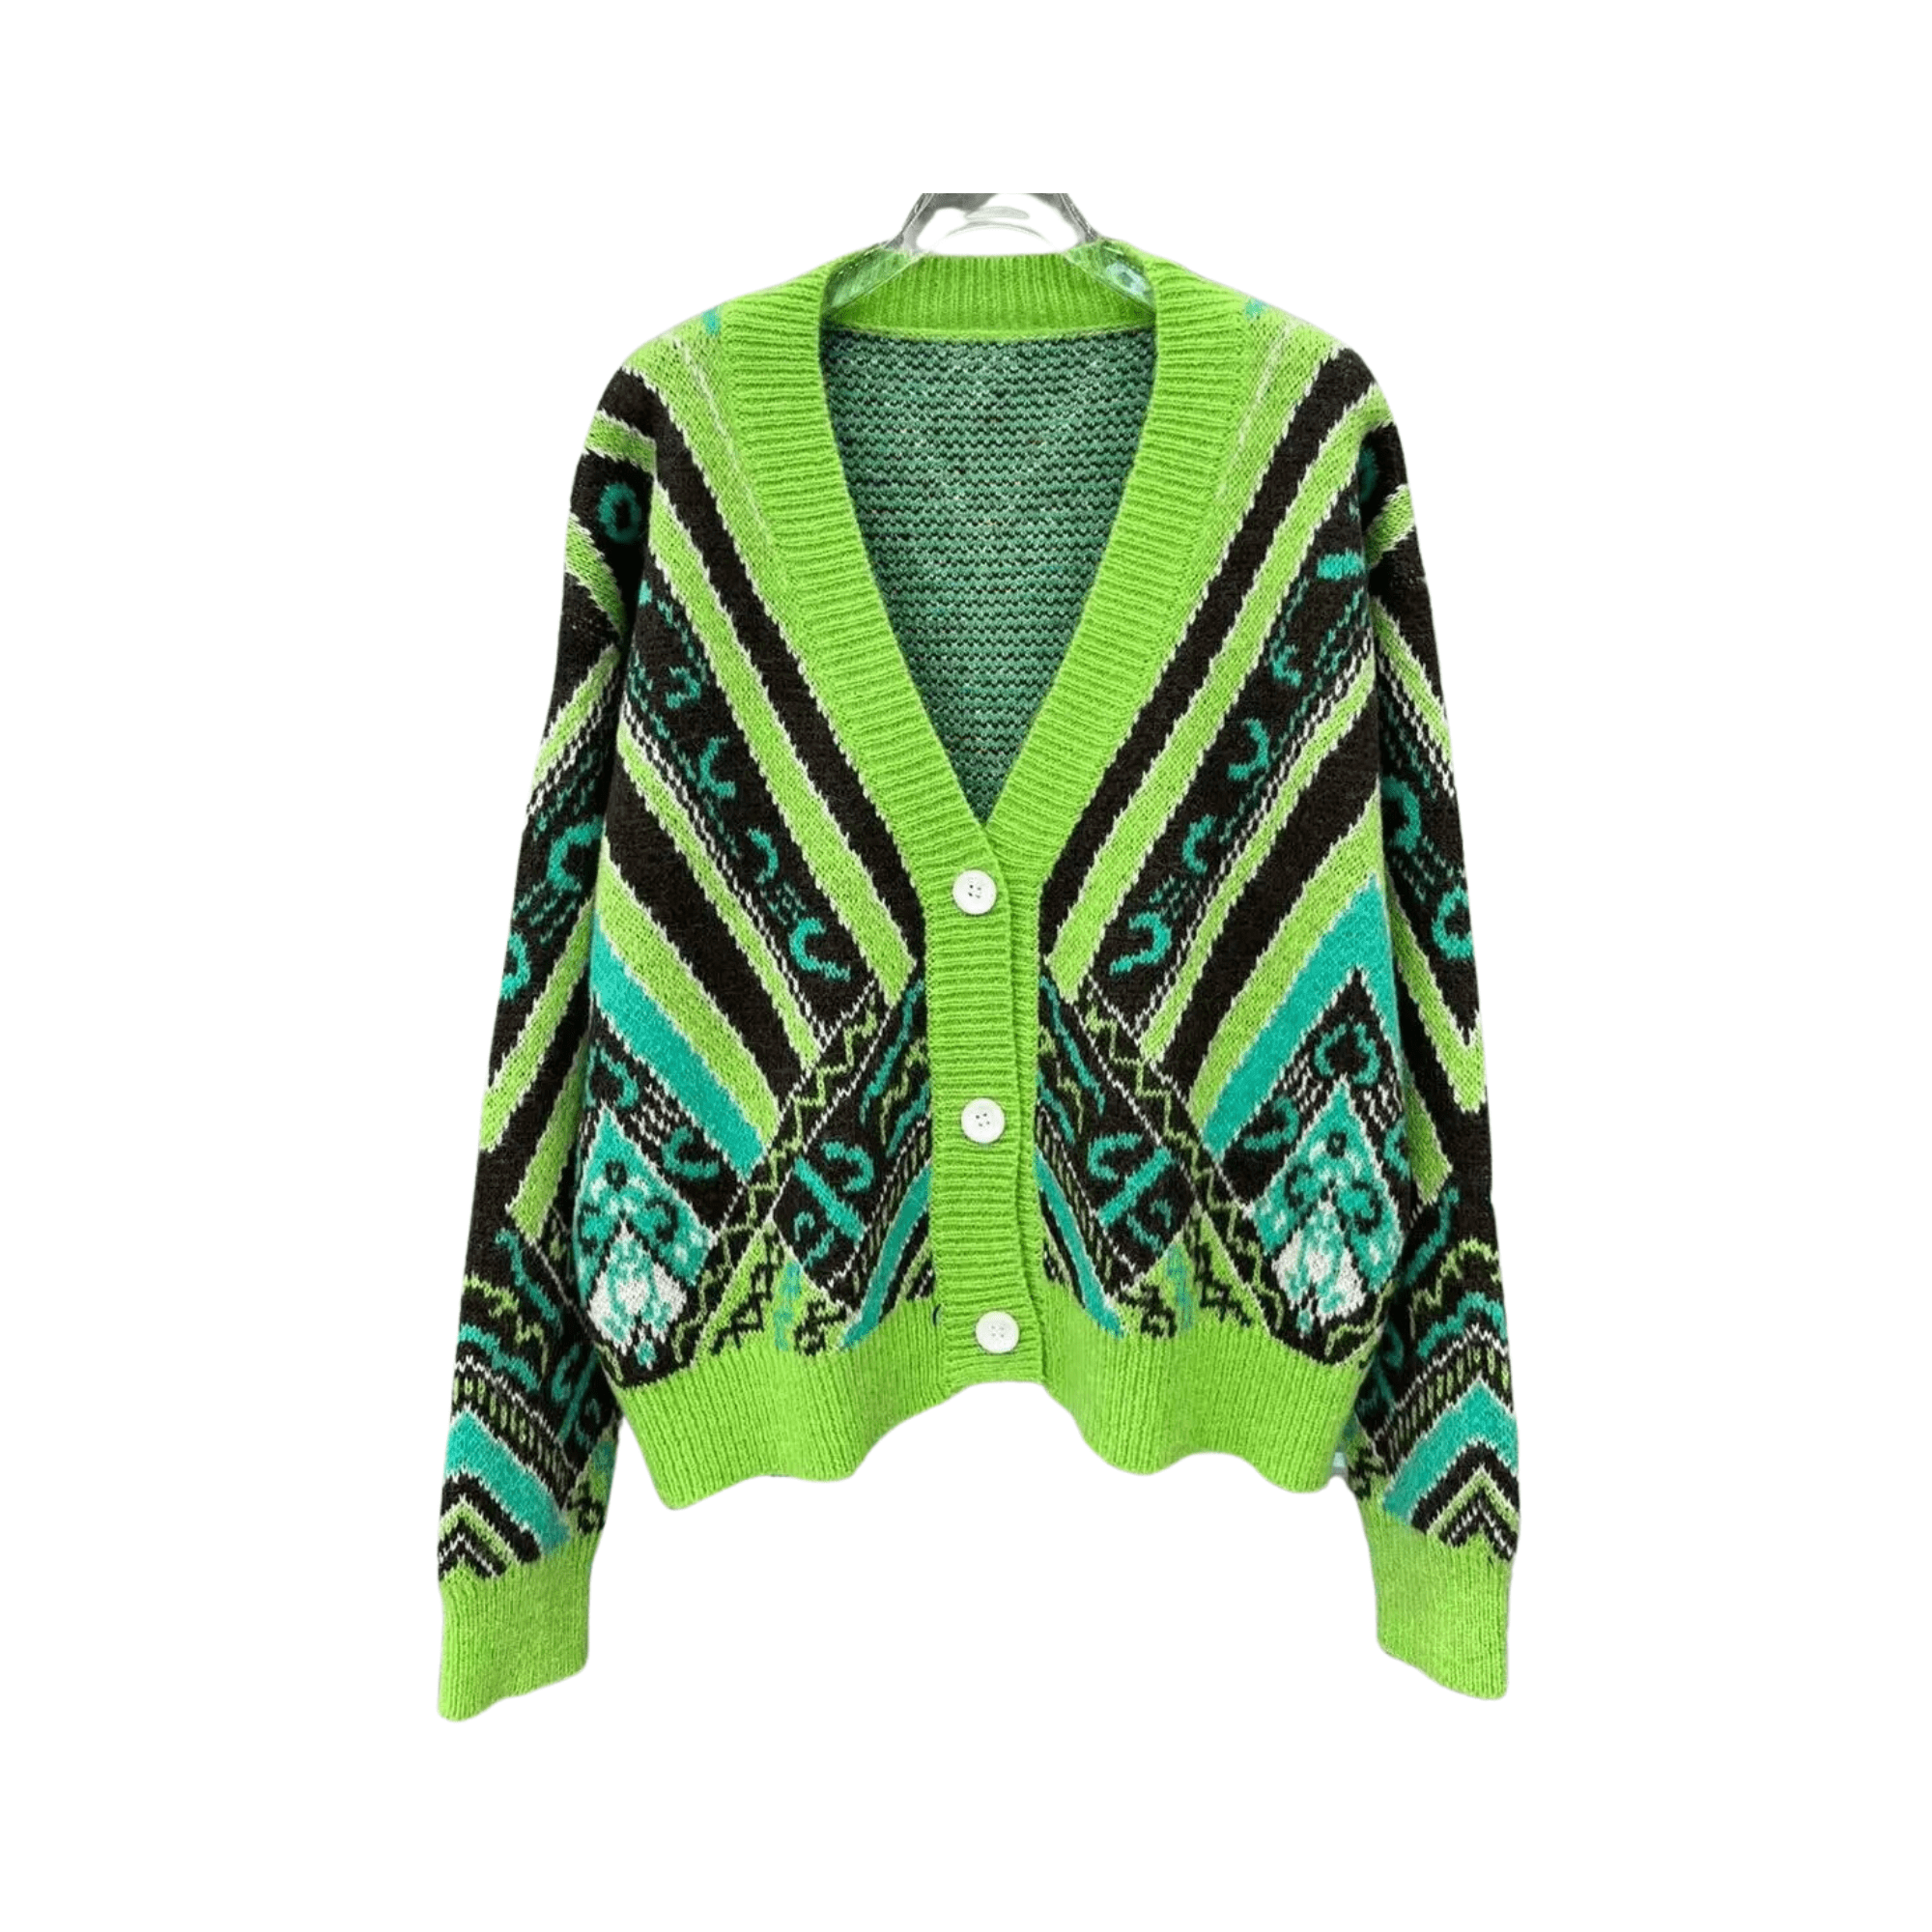 Green Loose Fit Knit Cardigan - Pre Order: Ships Feb 29